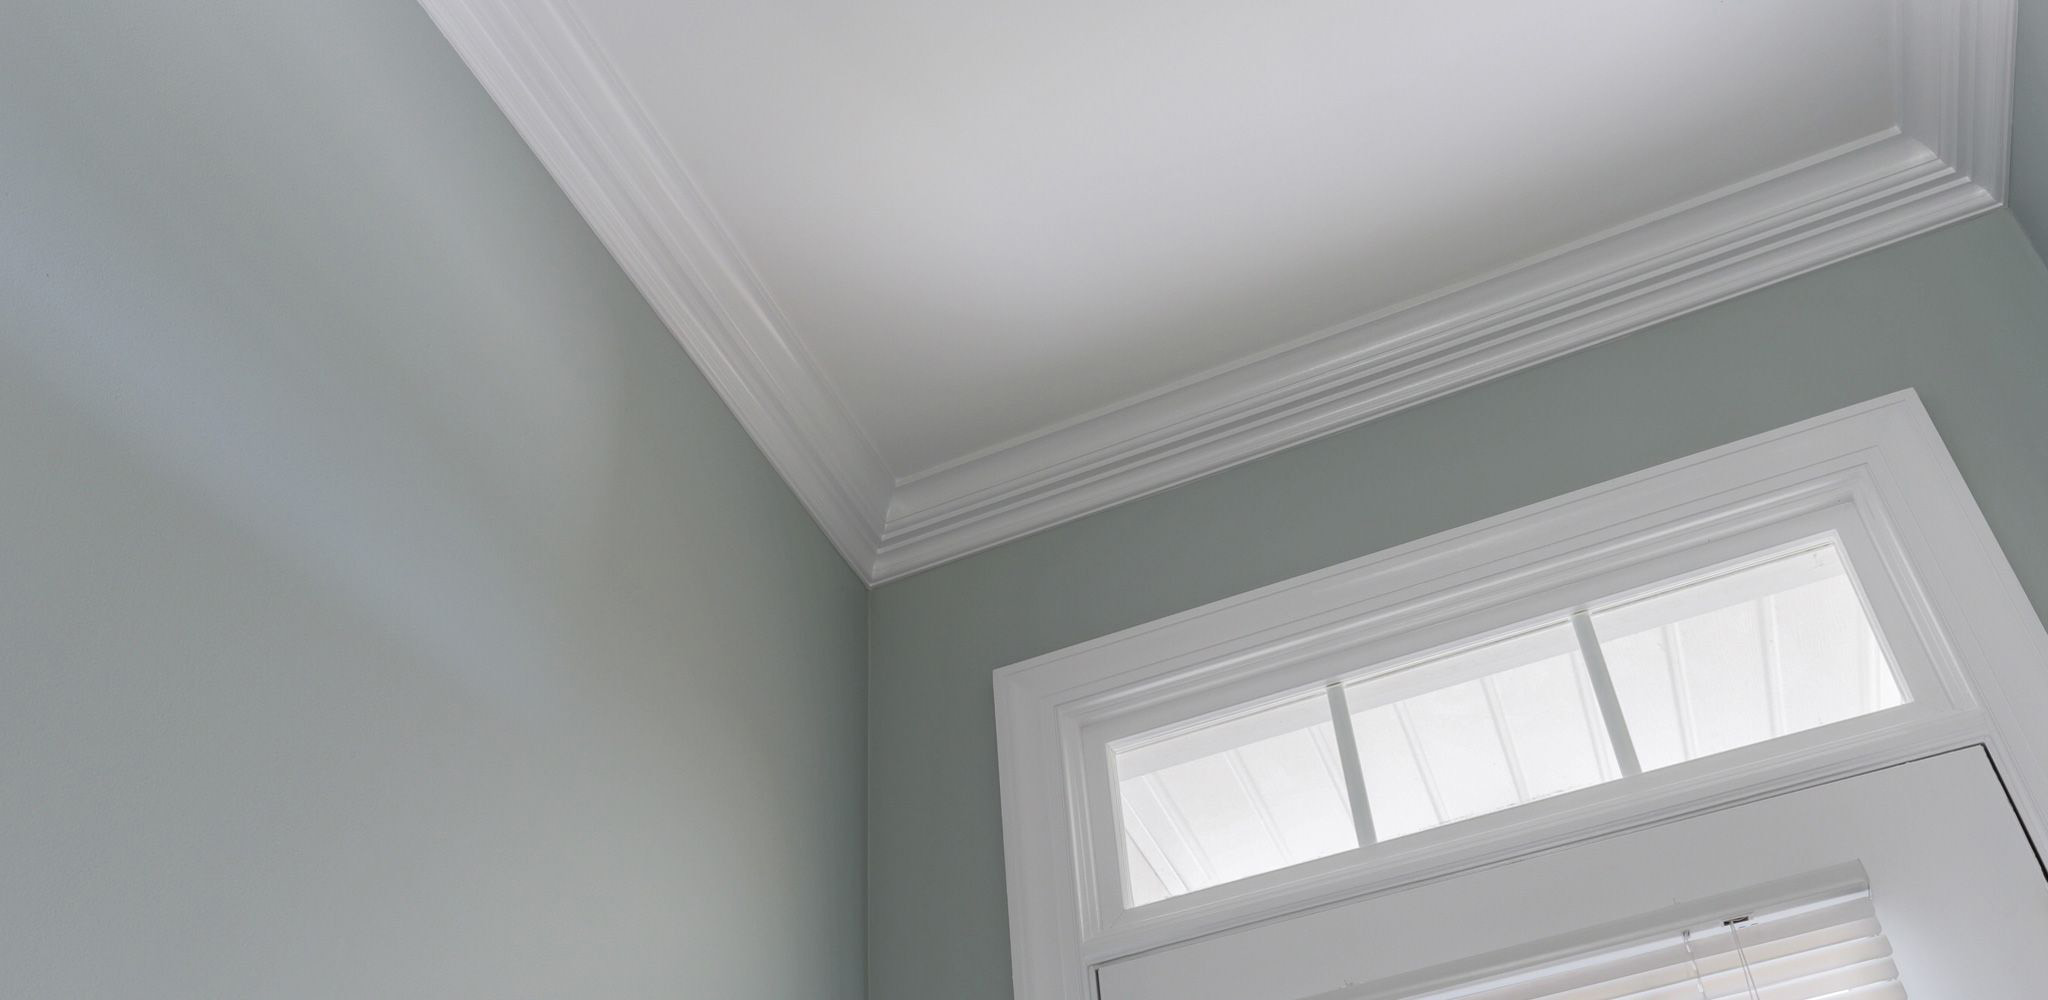  Notice the attention to detail and sharp painting of the crown molding, front door and door casing.